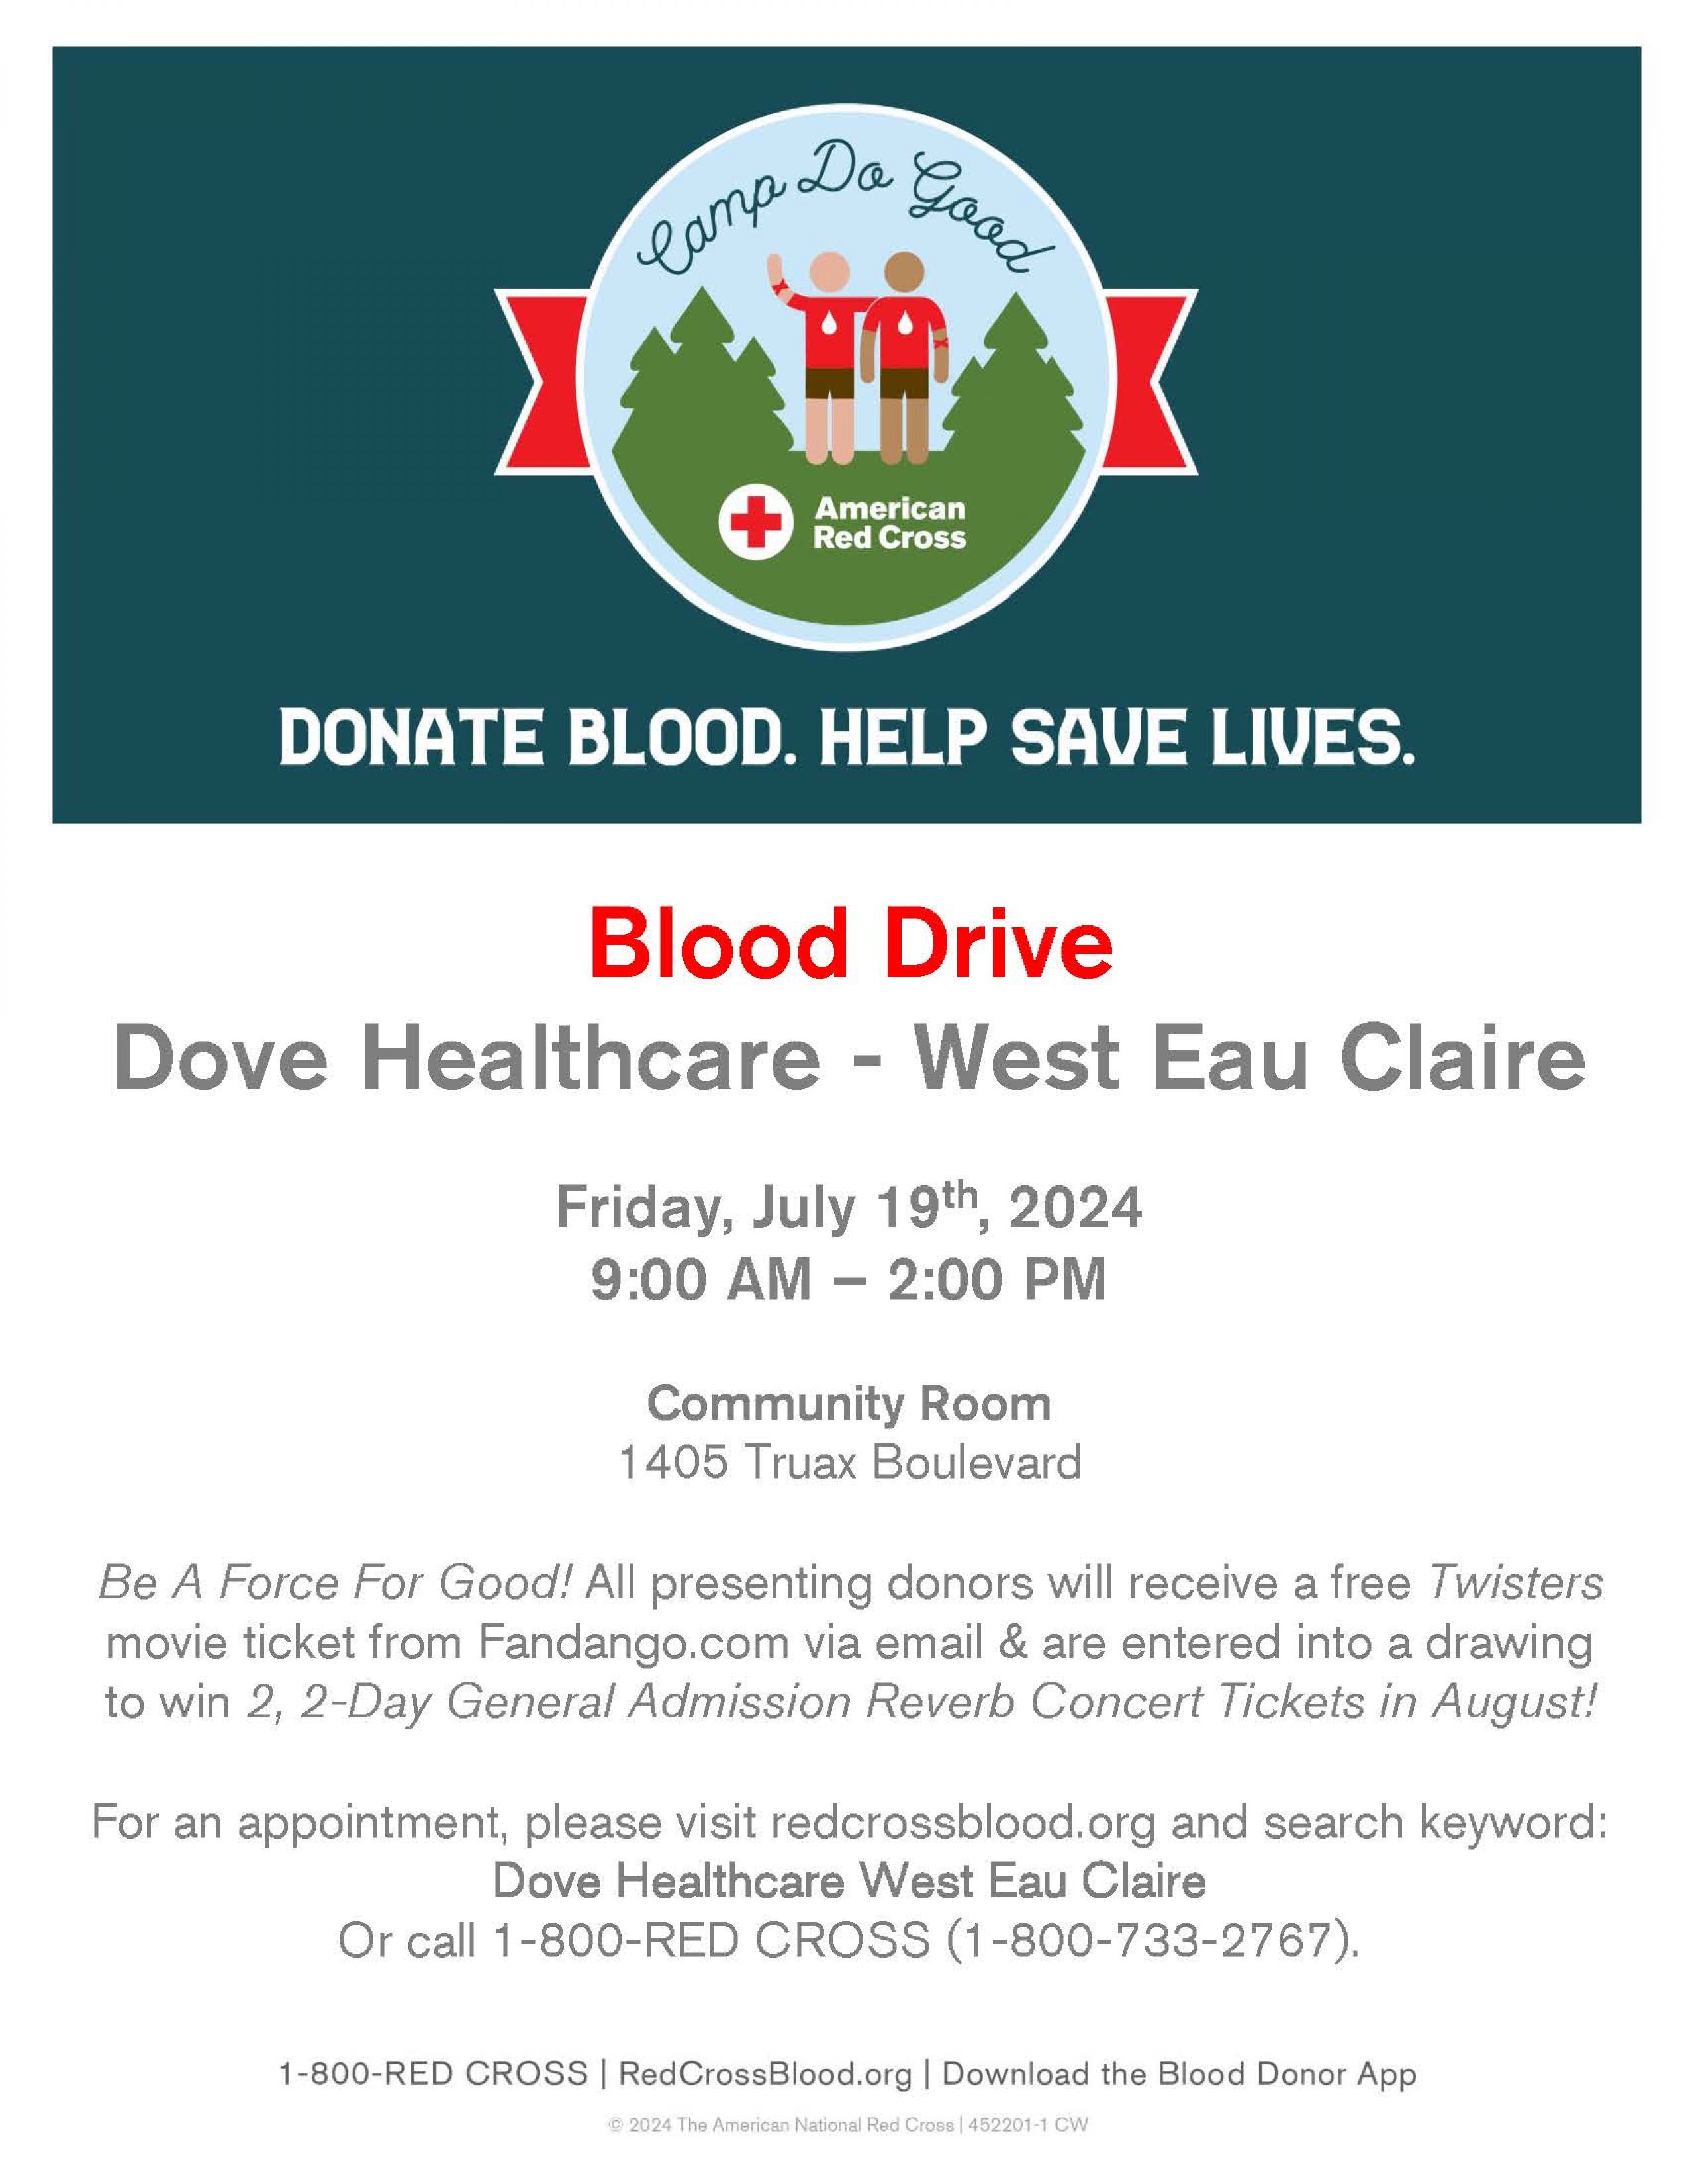 Save Lives. Attend this Blood Drive in Eau Claire.